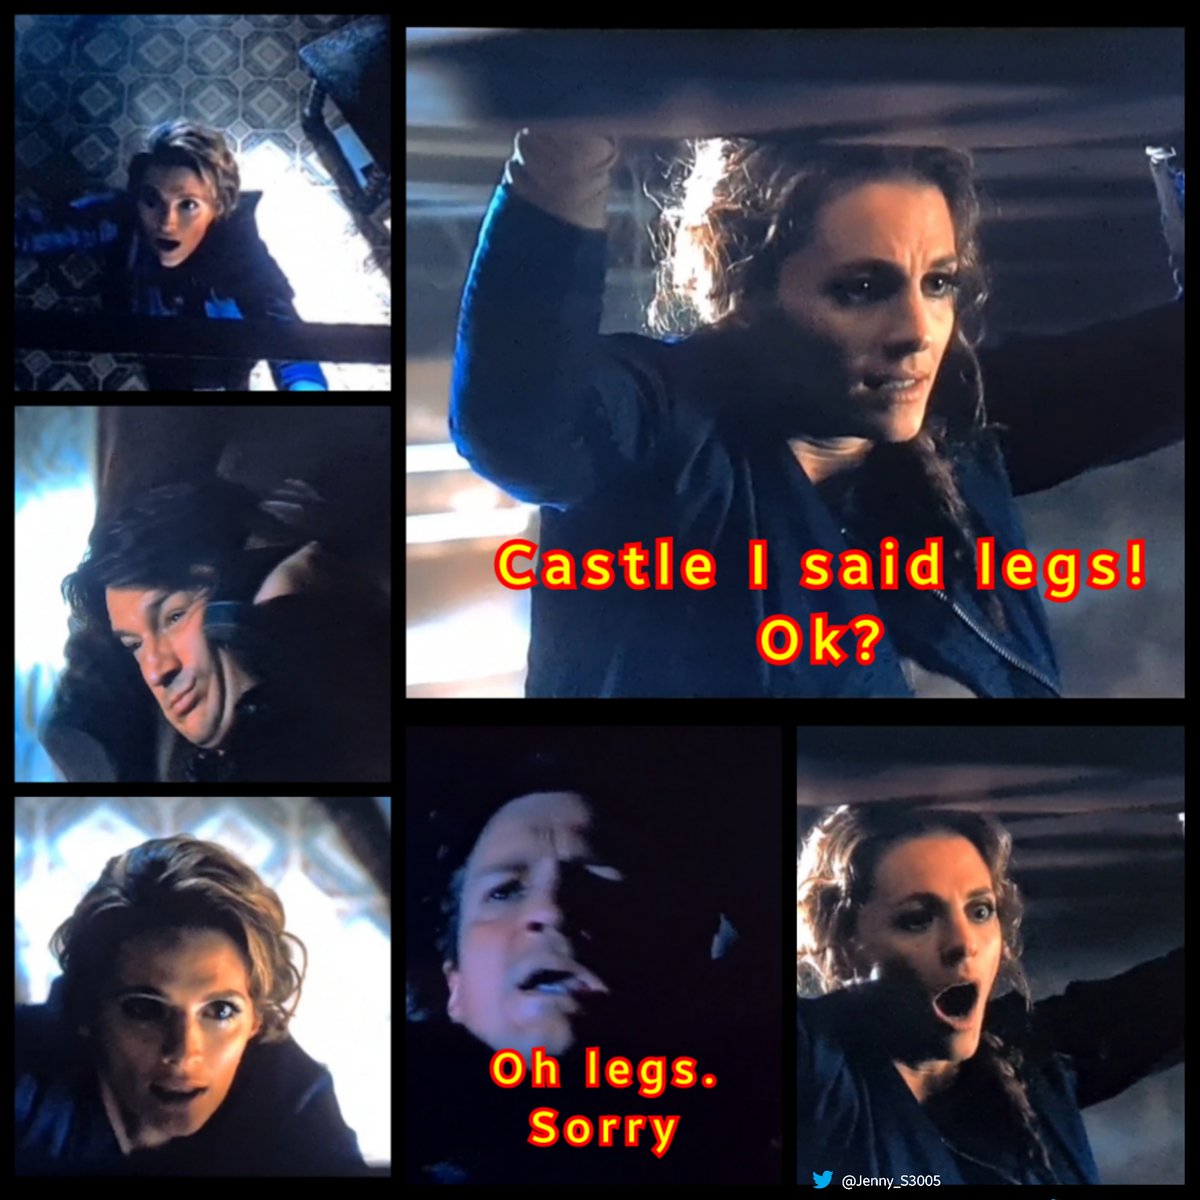 No #Castle aired on 07/01/xx-but a MEMORY-4X06-DEMONS (II/II)

KB: Castle, I said legs! Ok,?

C: Oh legs, sorry. https://t.co/X4x2TcZwXN